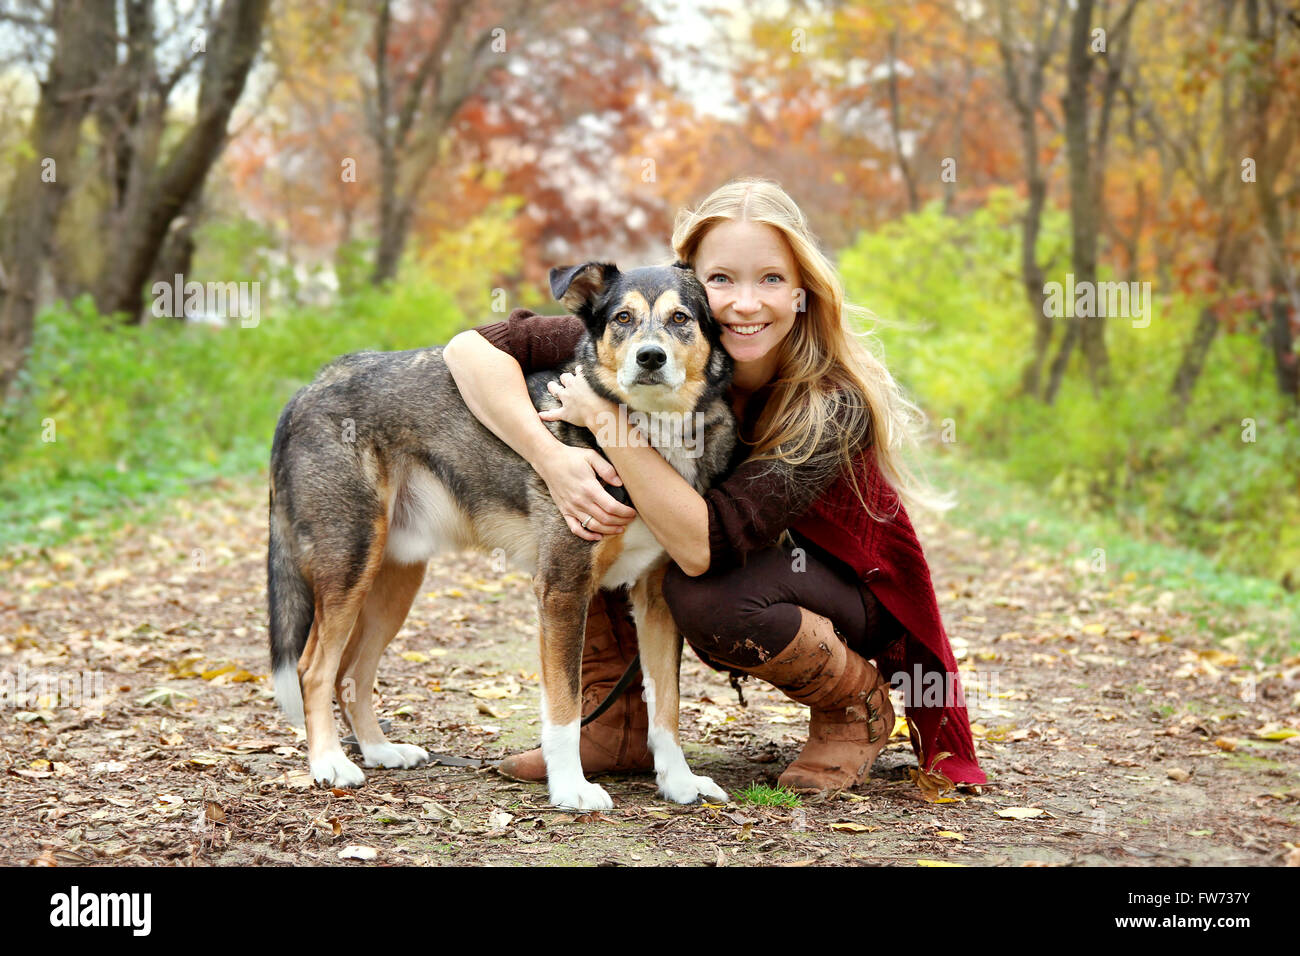 A thirty year old woman is stopping to hug her German Shepherd dog as they are walking through the fallen leaves in the woods Stock Photo